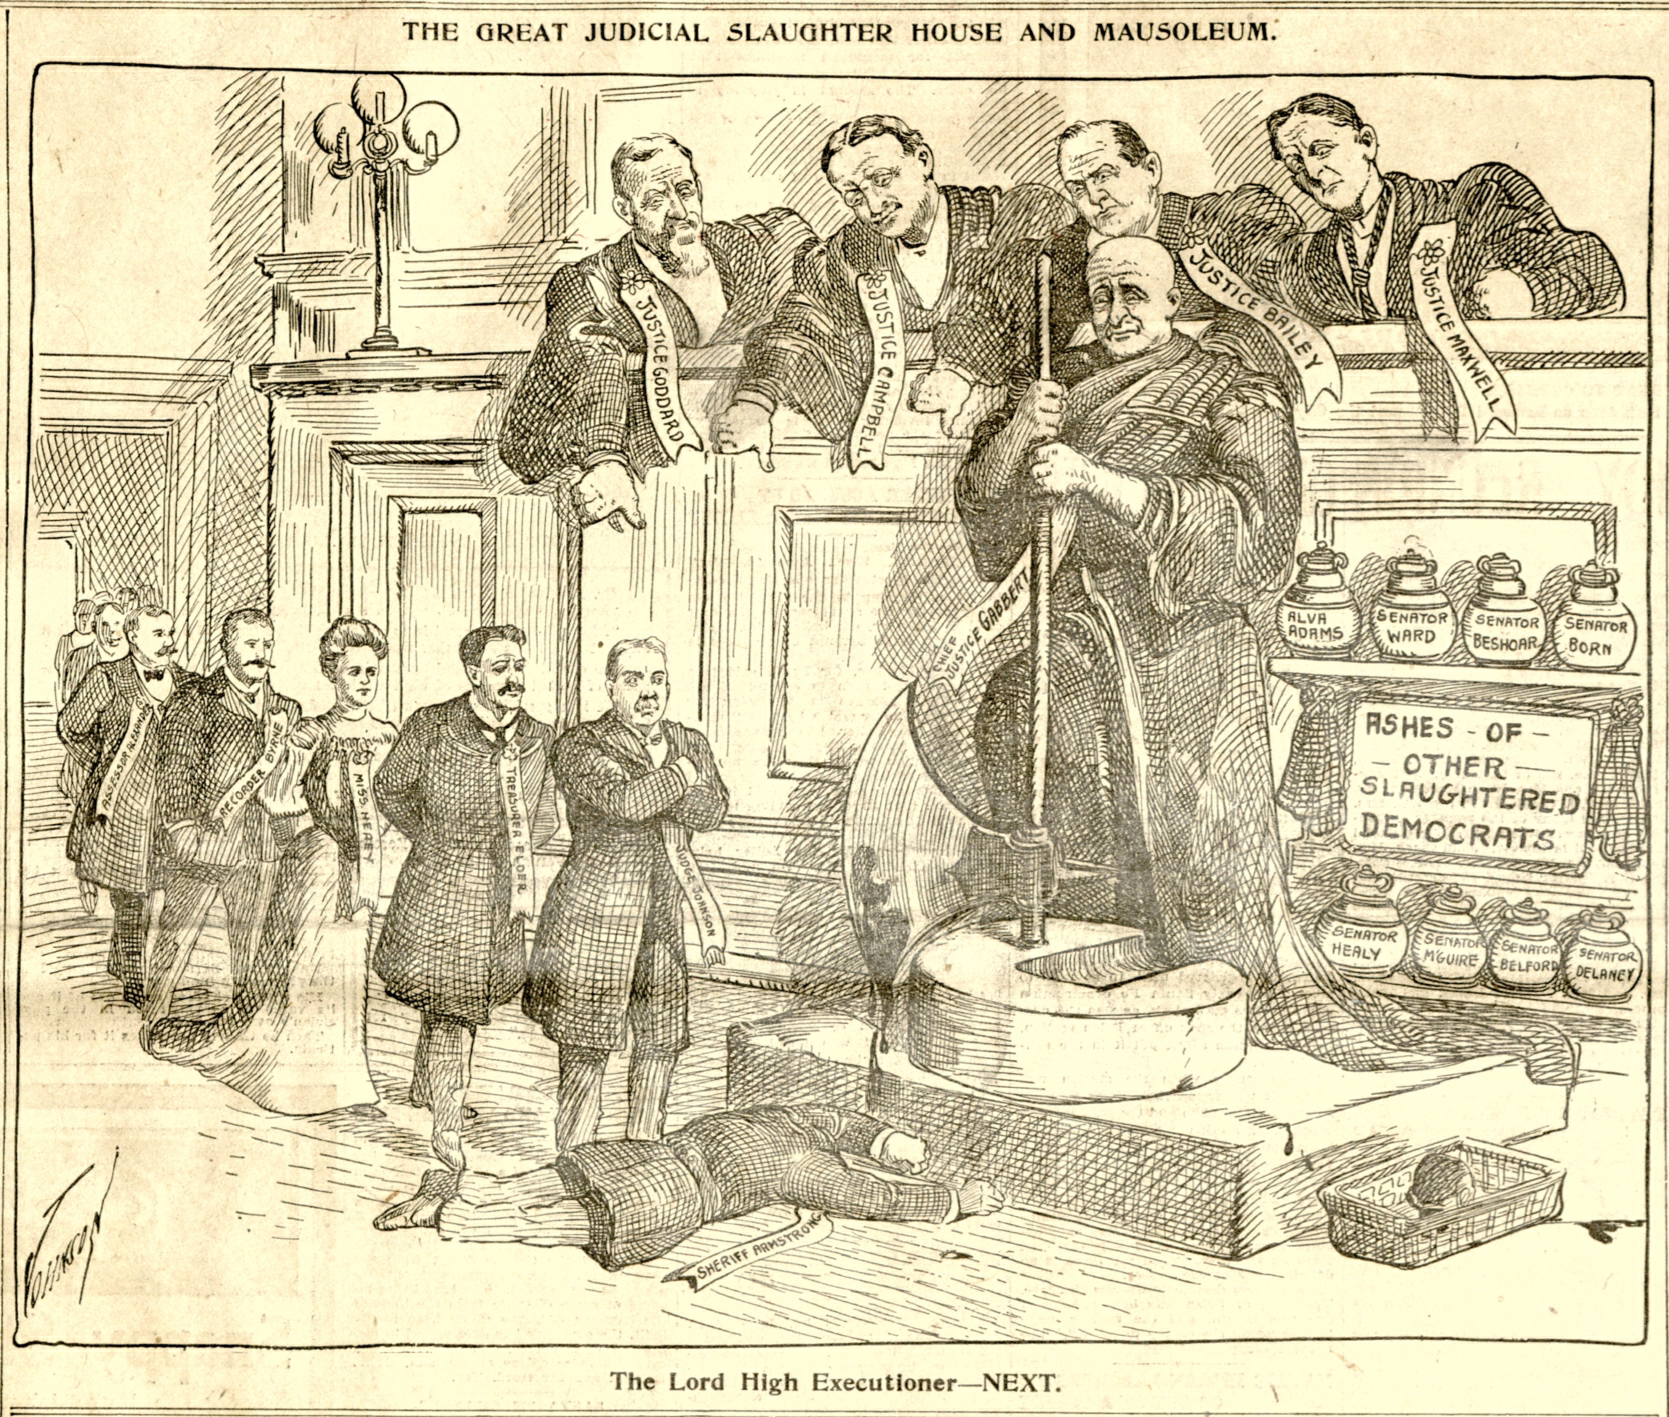 A 1905 political cartoon depicting the Colorado Supreme Court as executioners, labelled "The Great Judicial Slaughter house and Mausoleum." Adjacent to the Supreme Court is a group of urns labelled "Ashes of Other Slaughtered Democrats." The caption reads: "The lord High Executioner--Next."